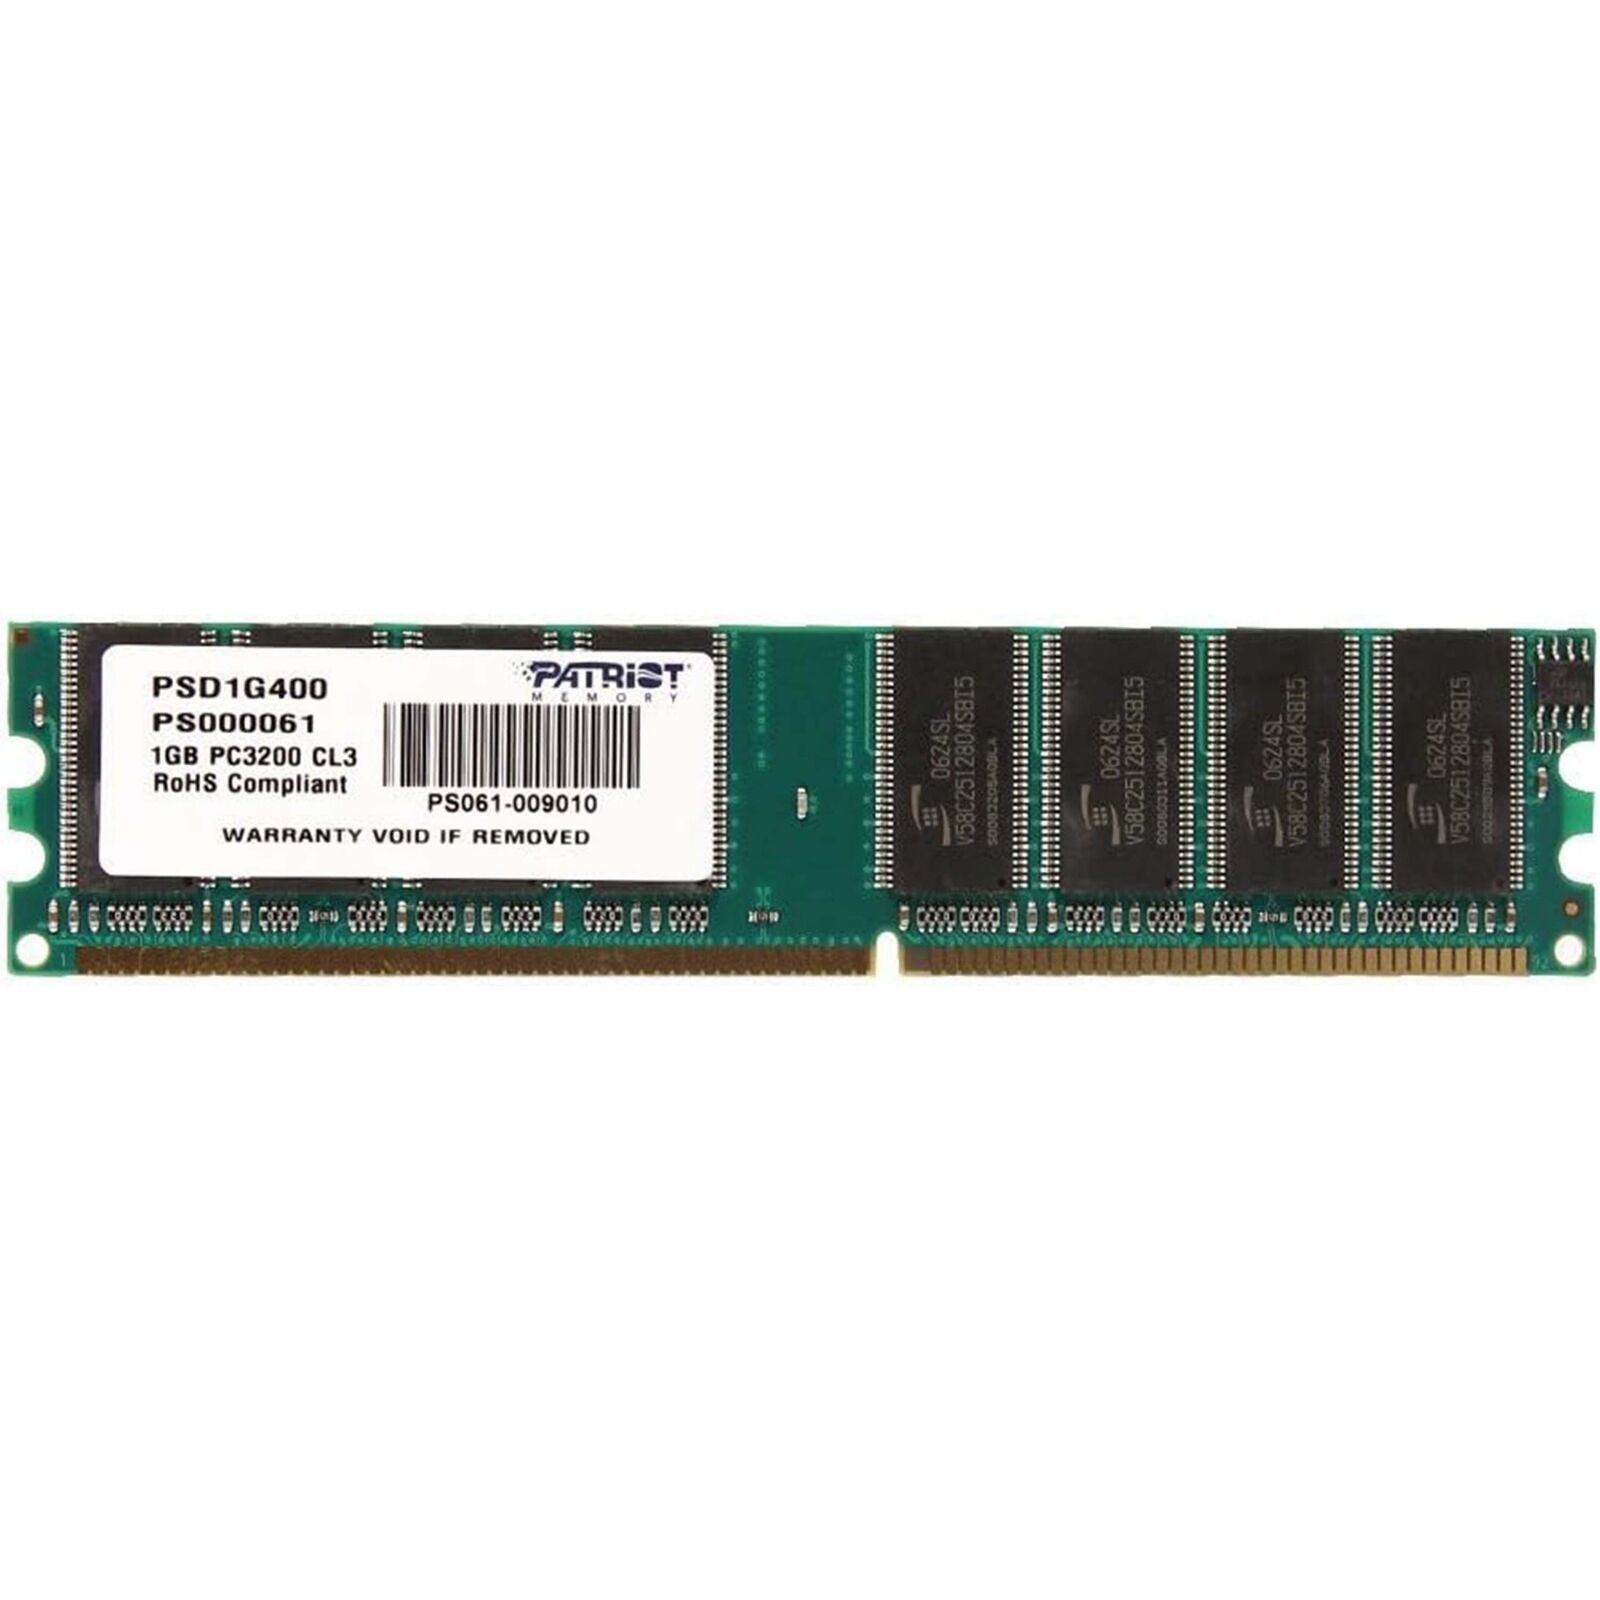 Patriot Ddr1 1gb 400mhz Pc3200 RAM Memory Module DDR Dimm Comput [Reconditioned